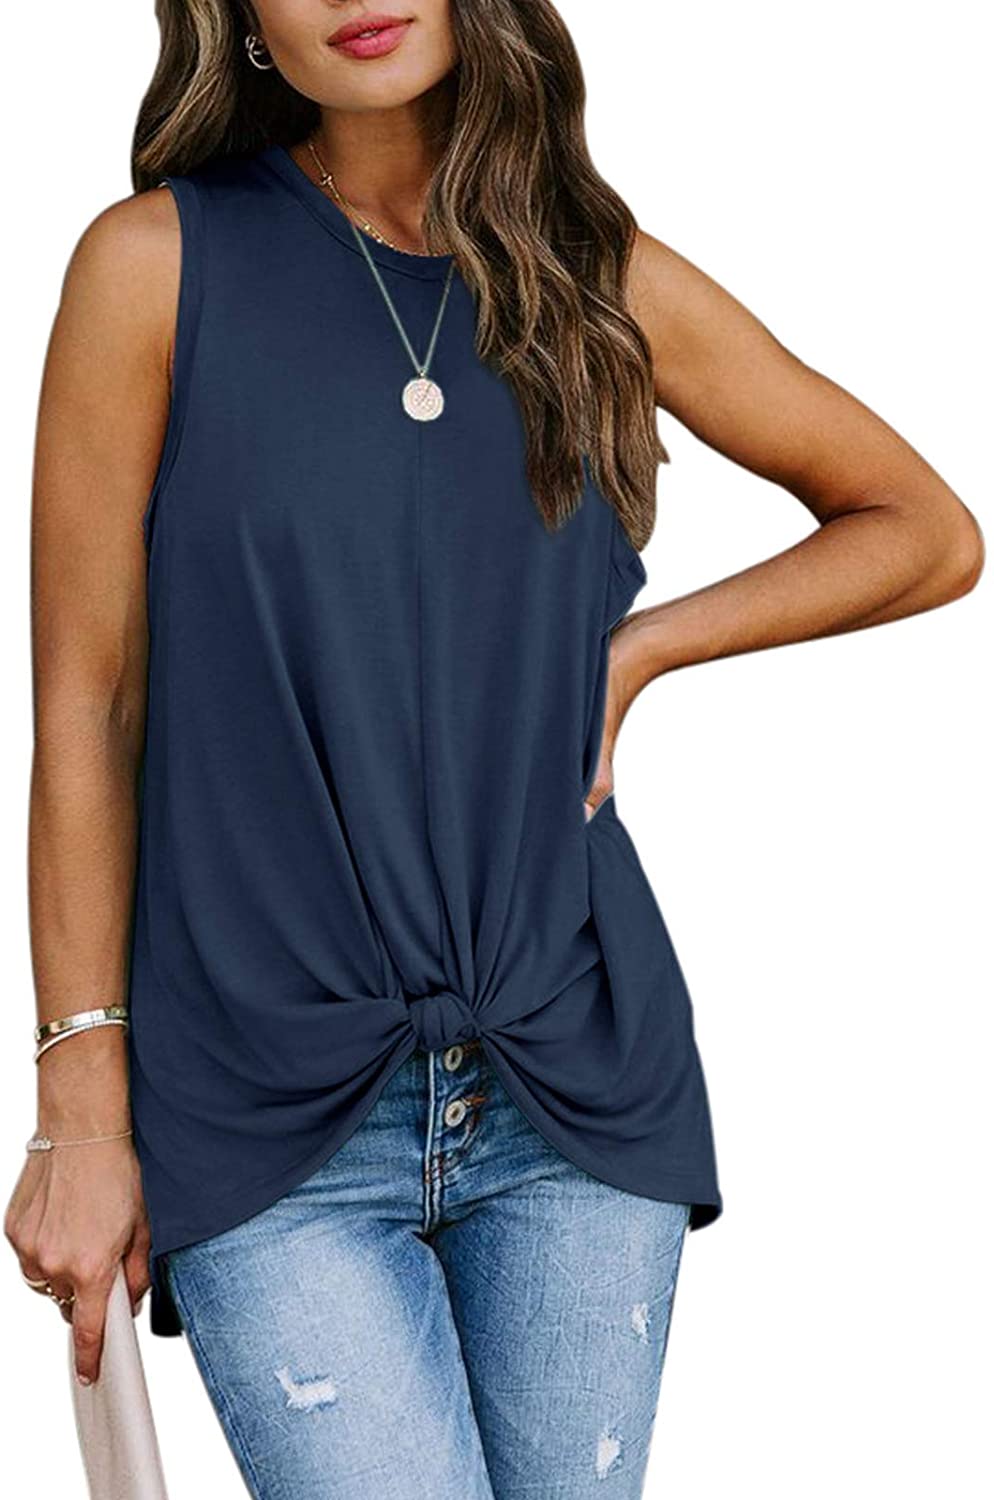 Berryou Womens Sleeveless Tank Tops Tie Knot Front Solid Round Neck Loose T  Shir | eBay